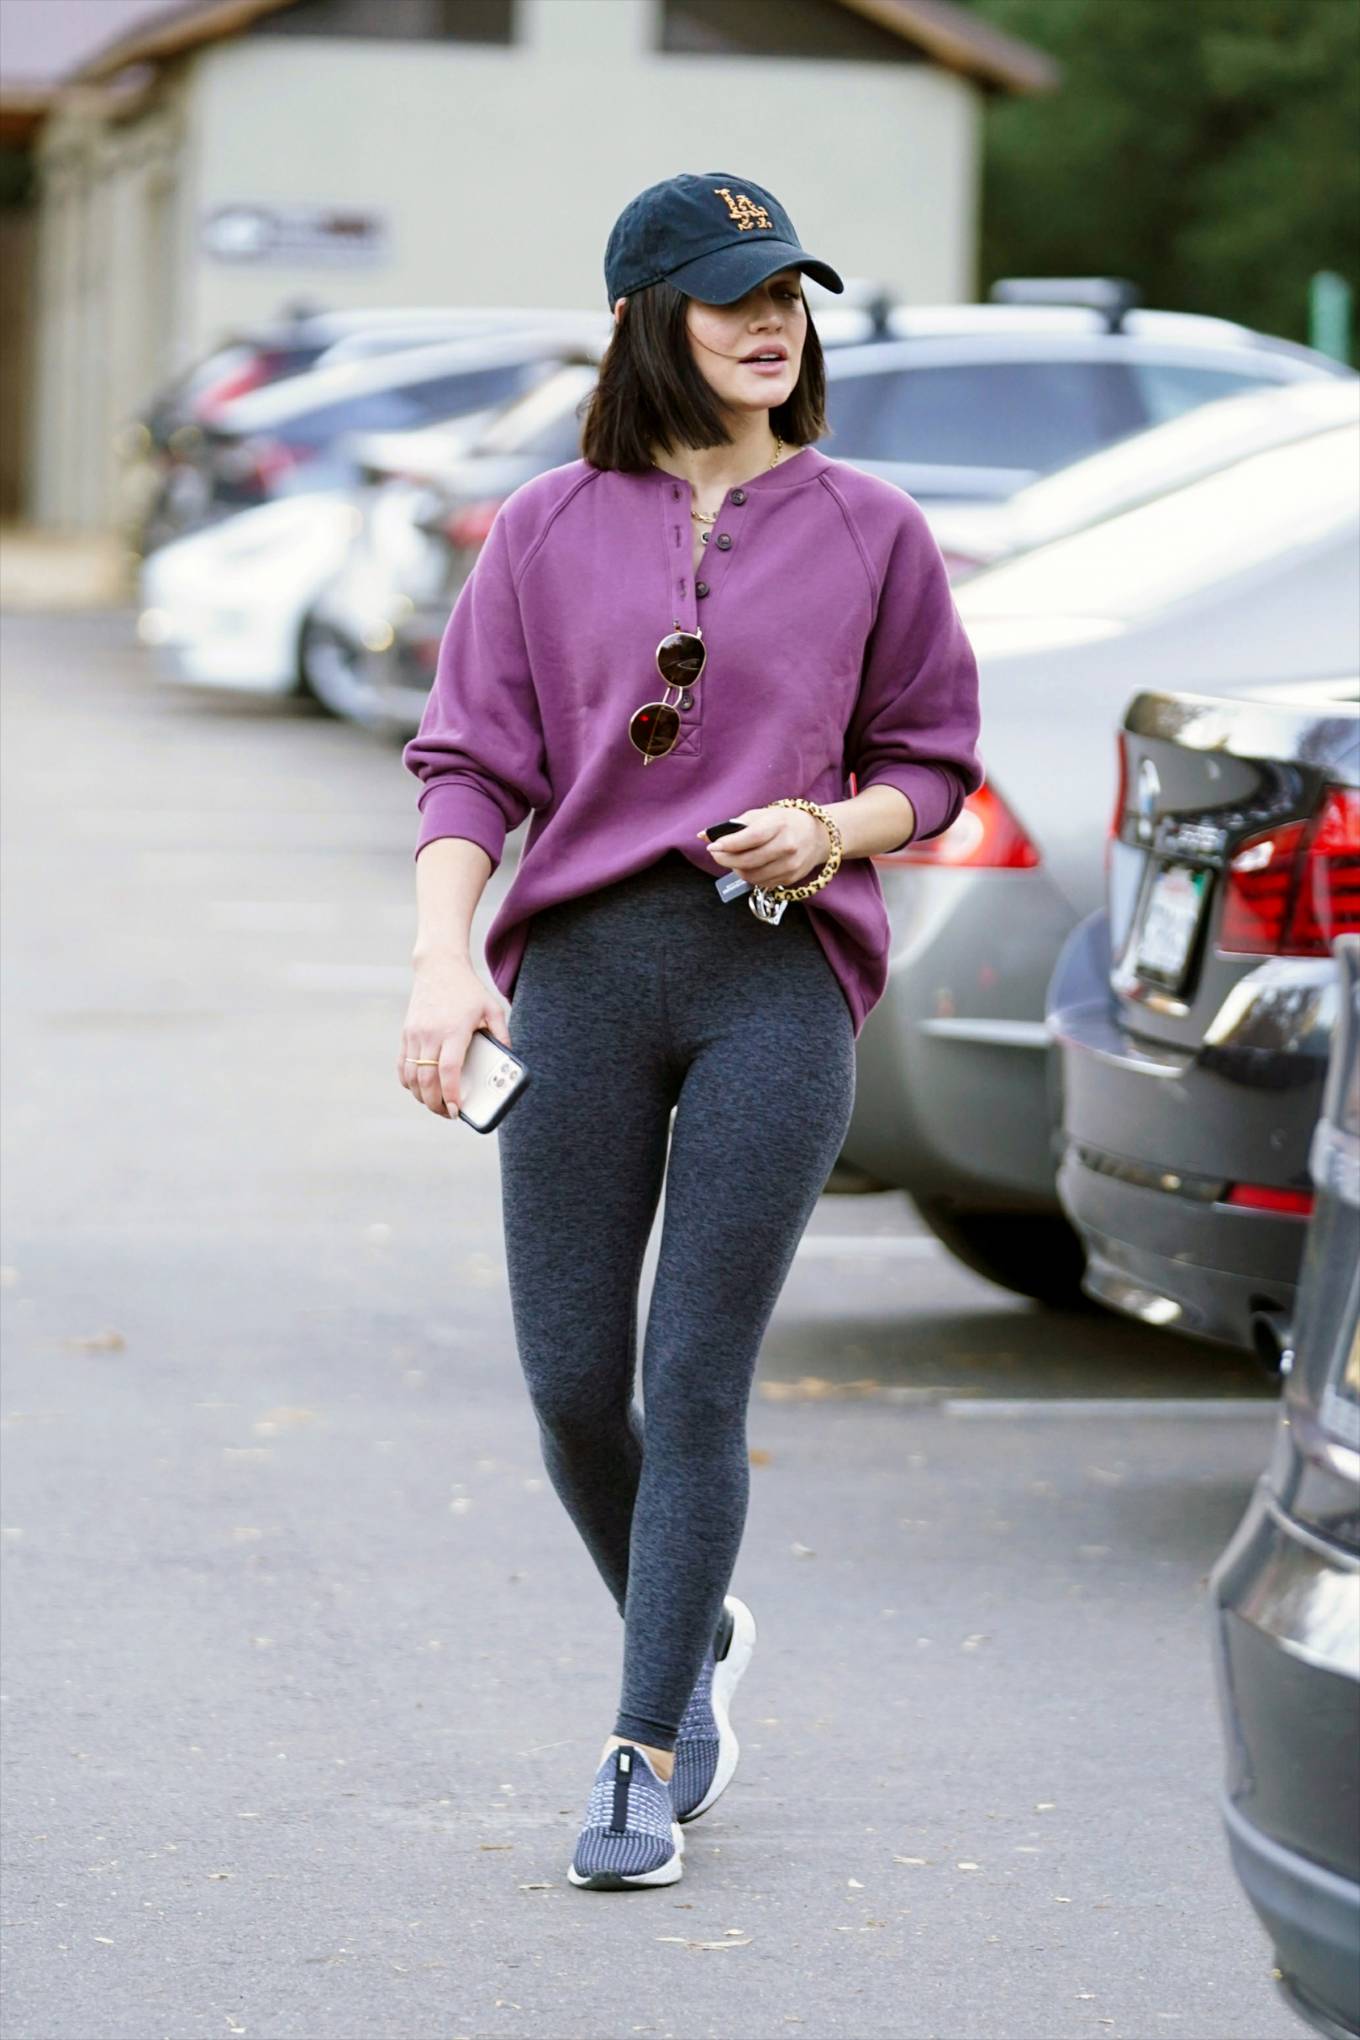 Lucy Hale 2022 : Lucy Hale – Wears a purple sweater and tights in Los Angeles-07